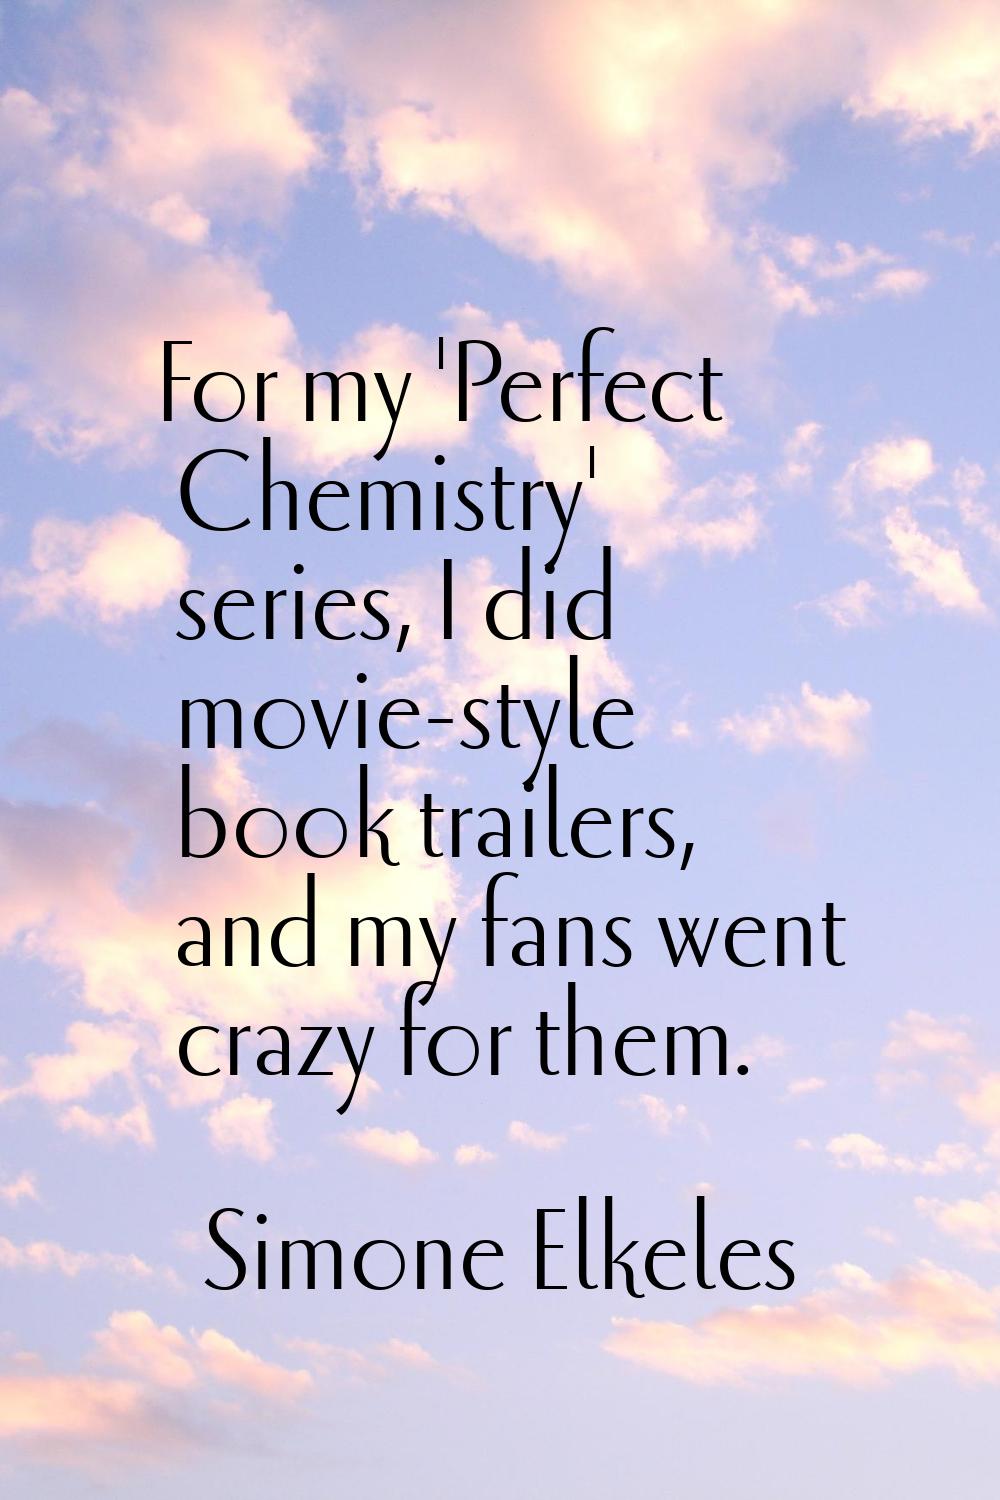 For my 'Perfect Chemistry' series, I did movie-style book trailers, and my fans went crazy for them